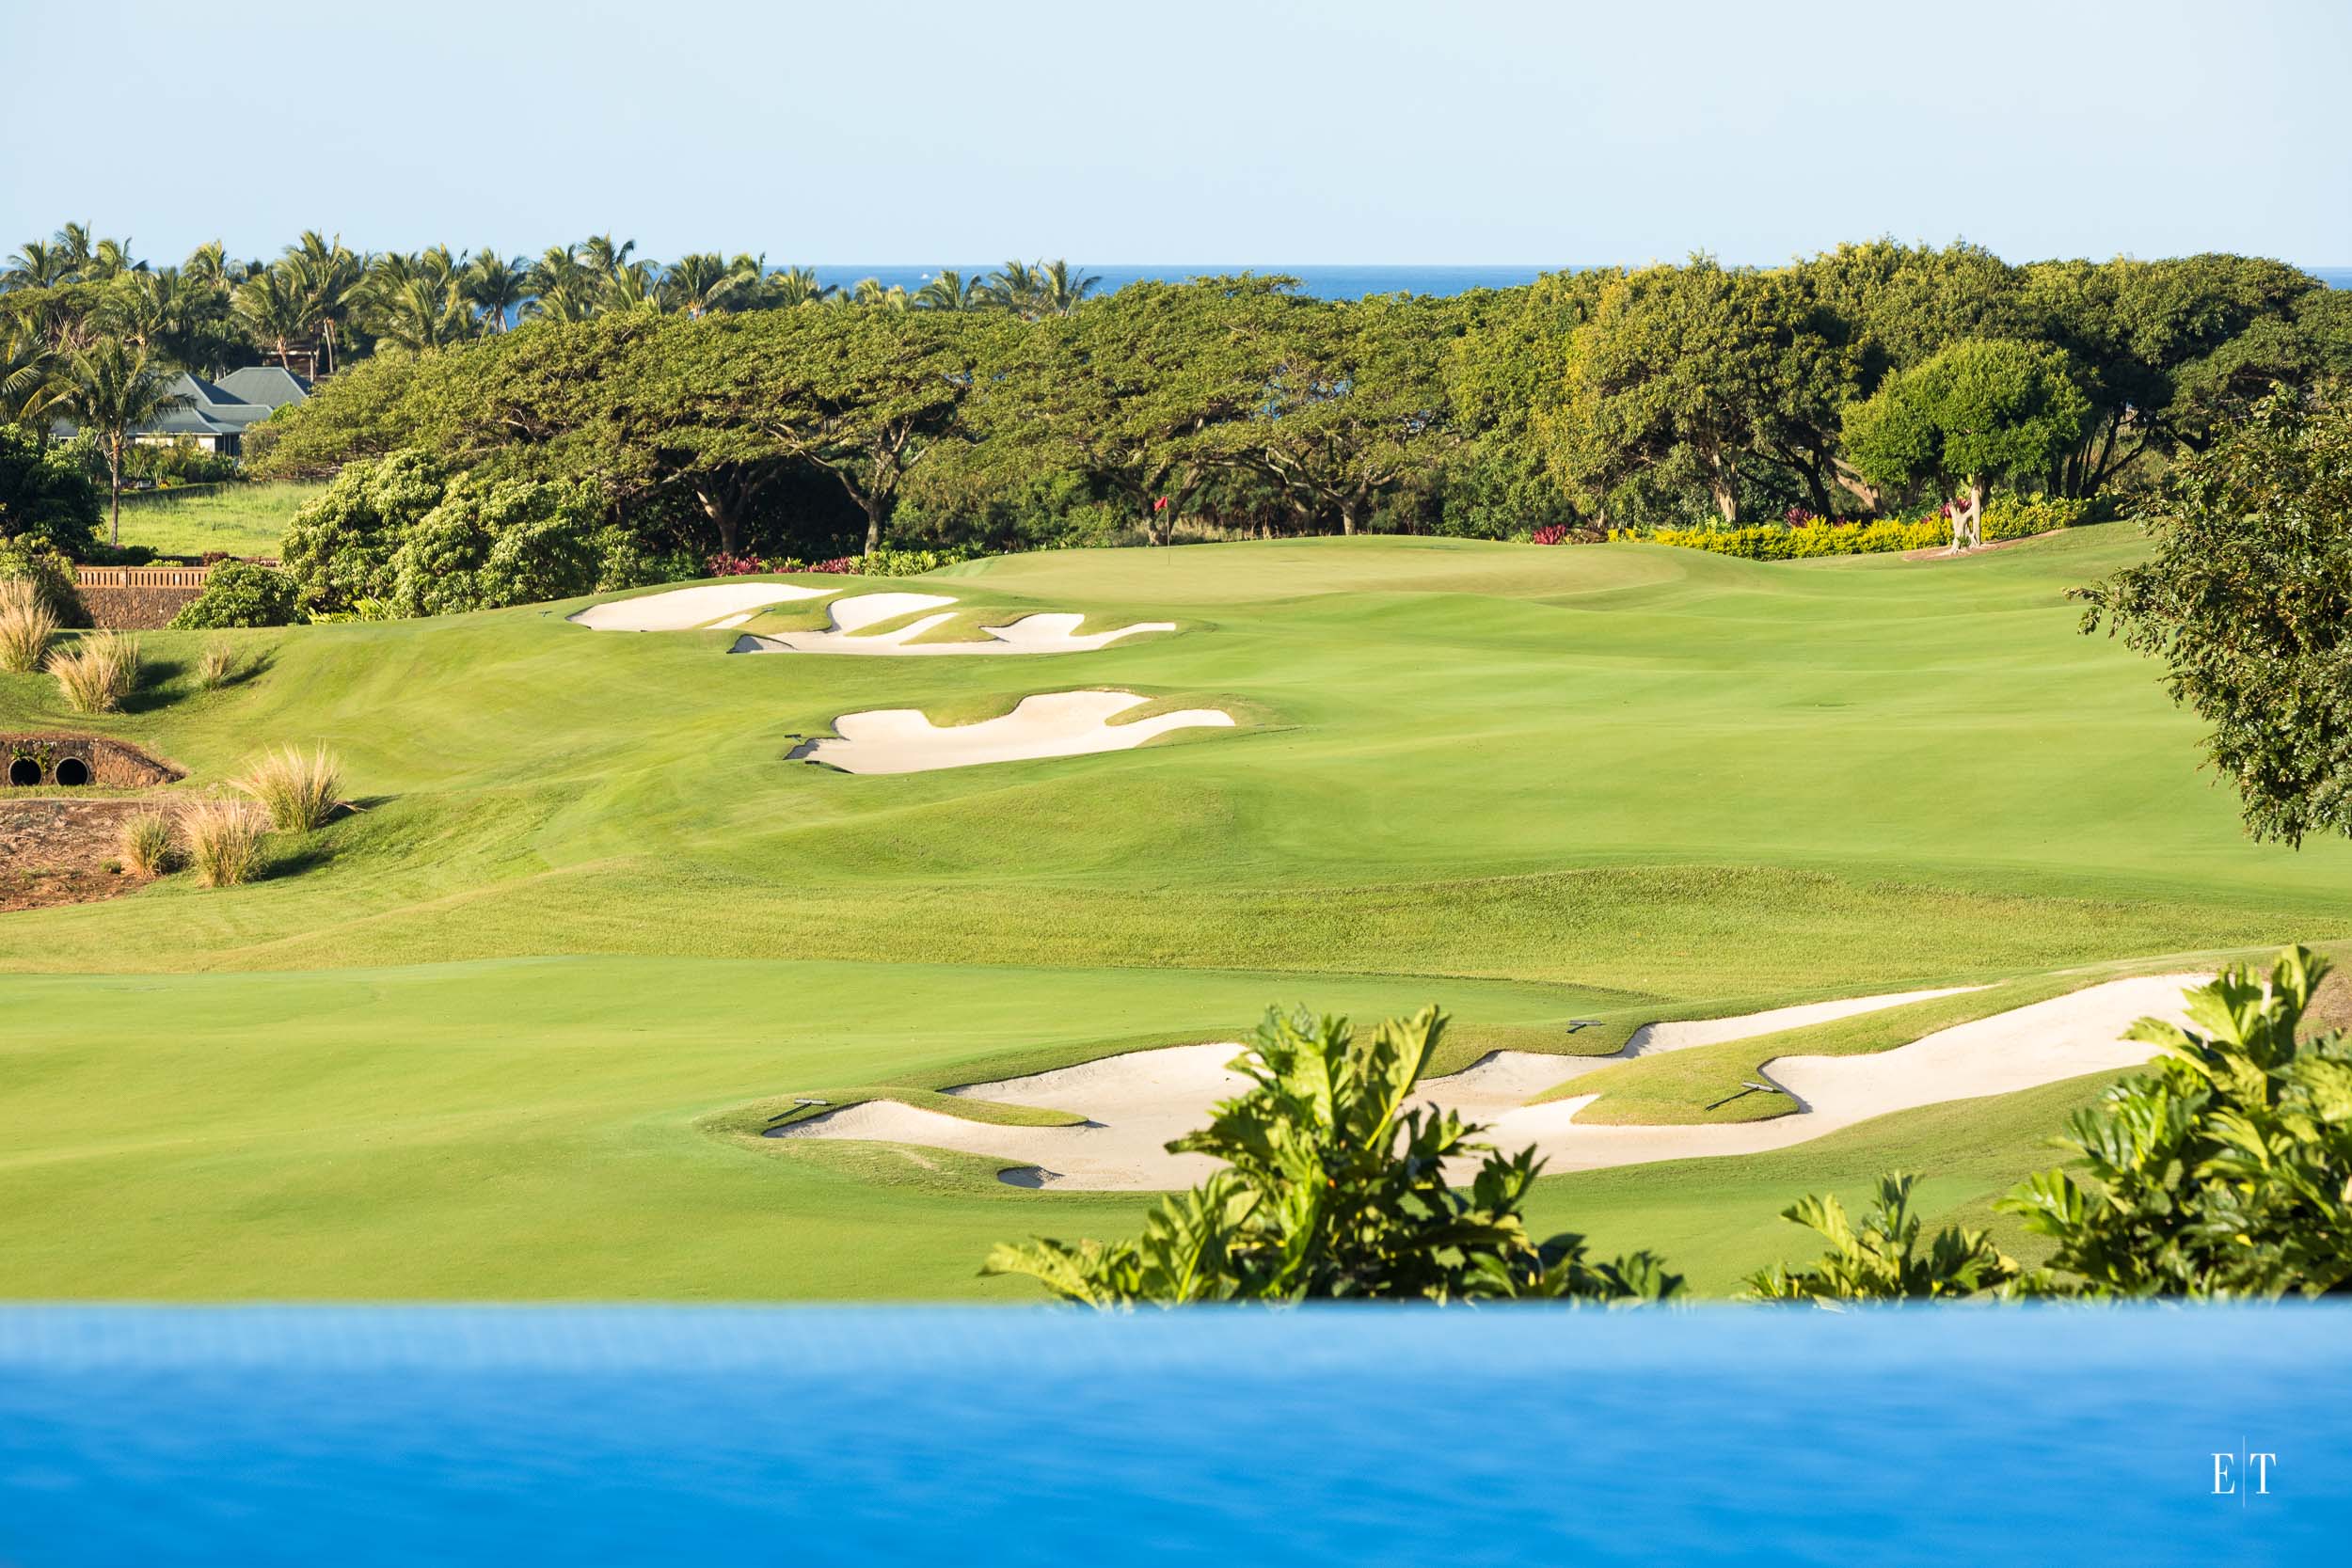 Fabulous views of the ocean and golf course at Kukuiula